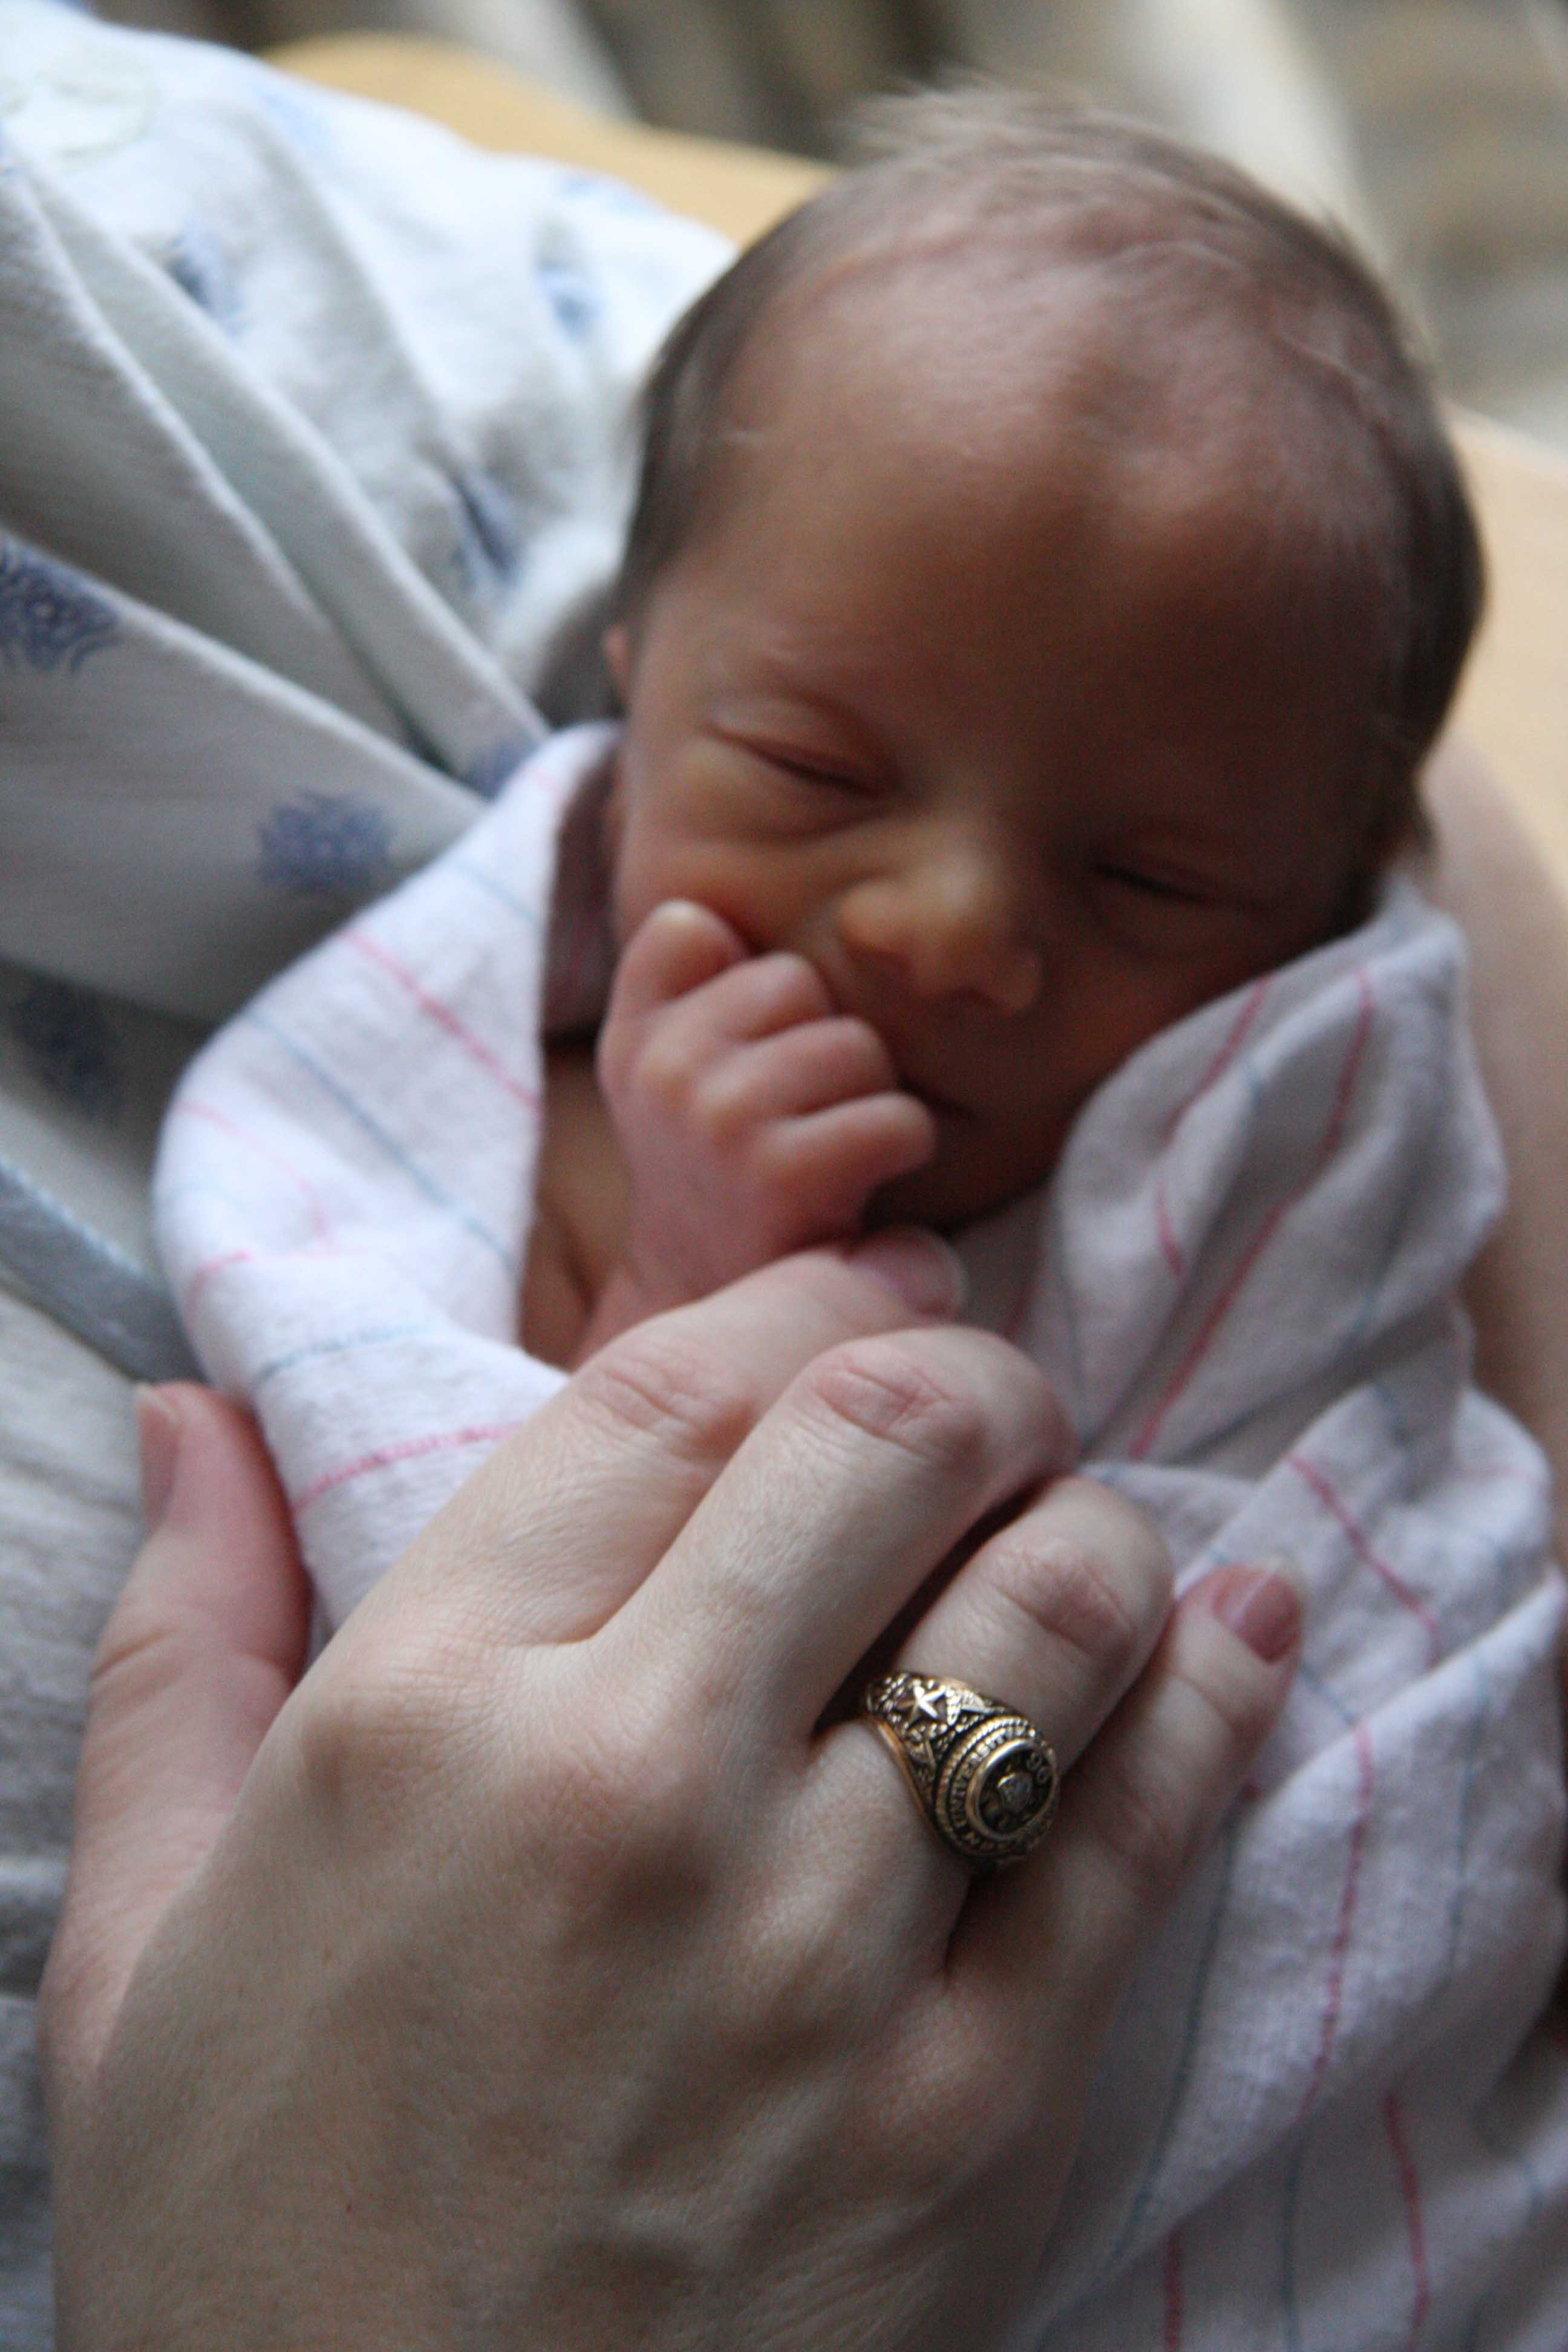 Know Someone in the NICU? 10 Ways You Can Help - Hand to Hold